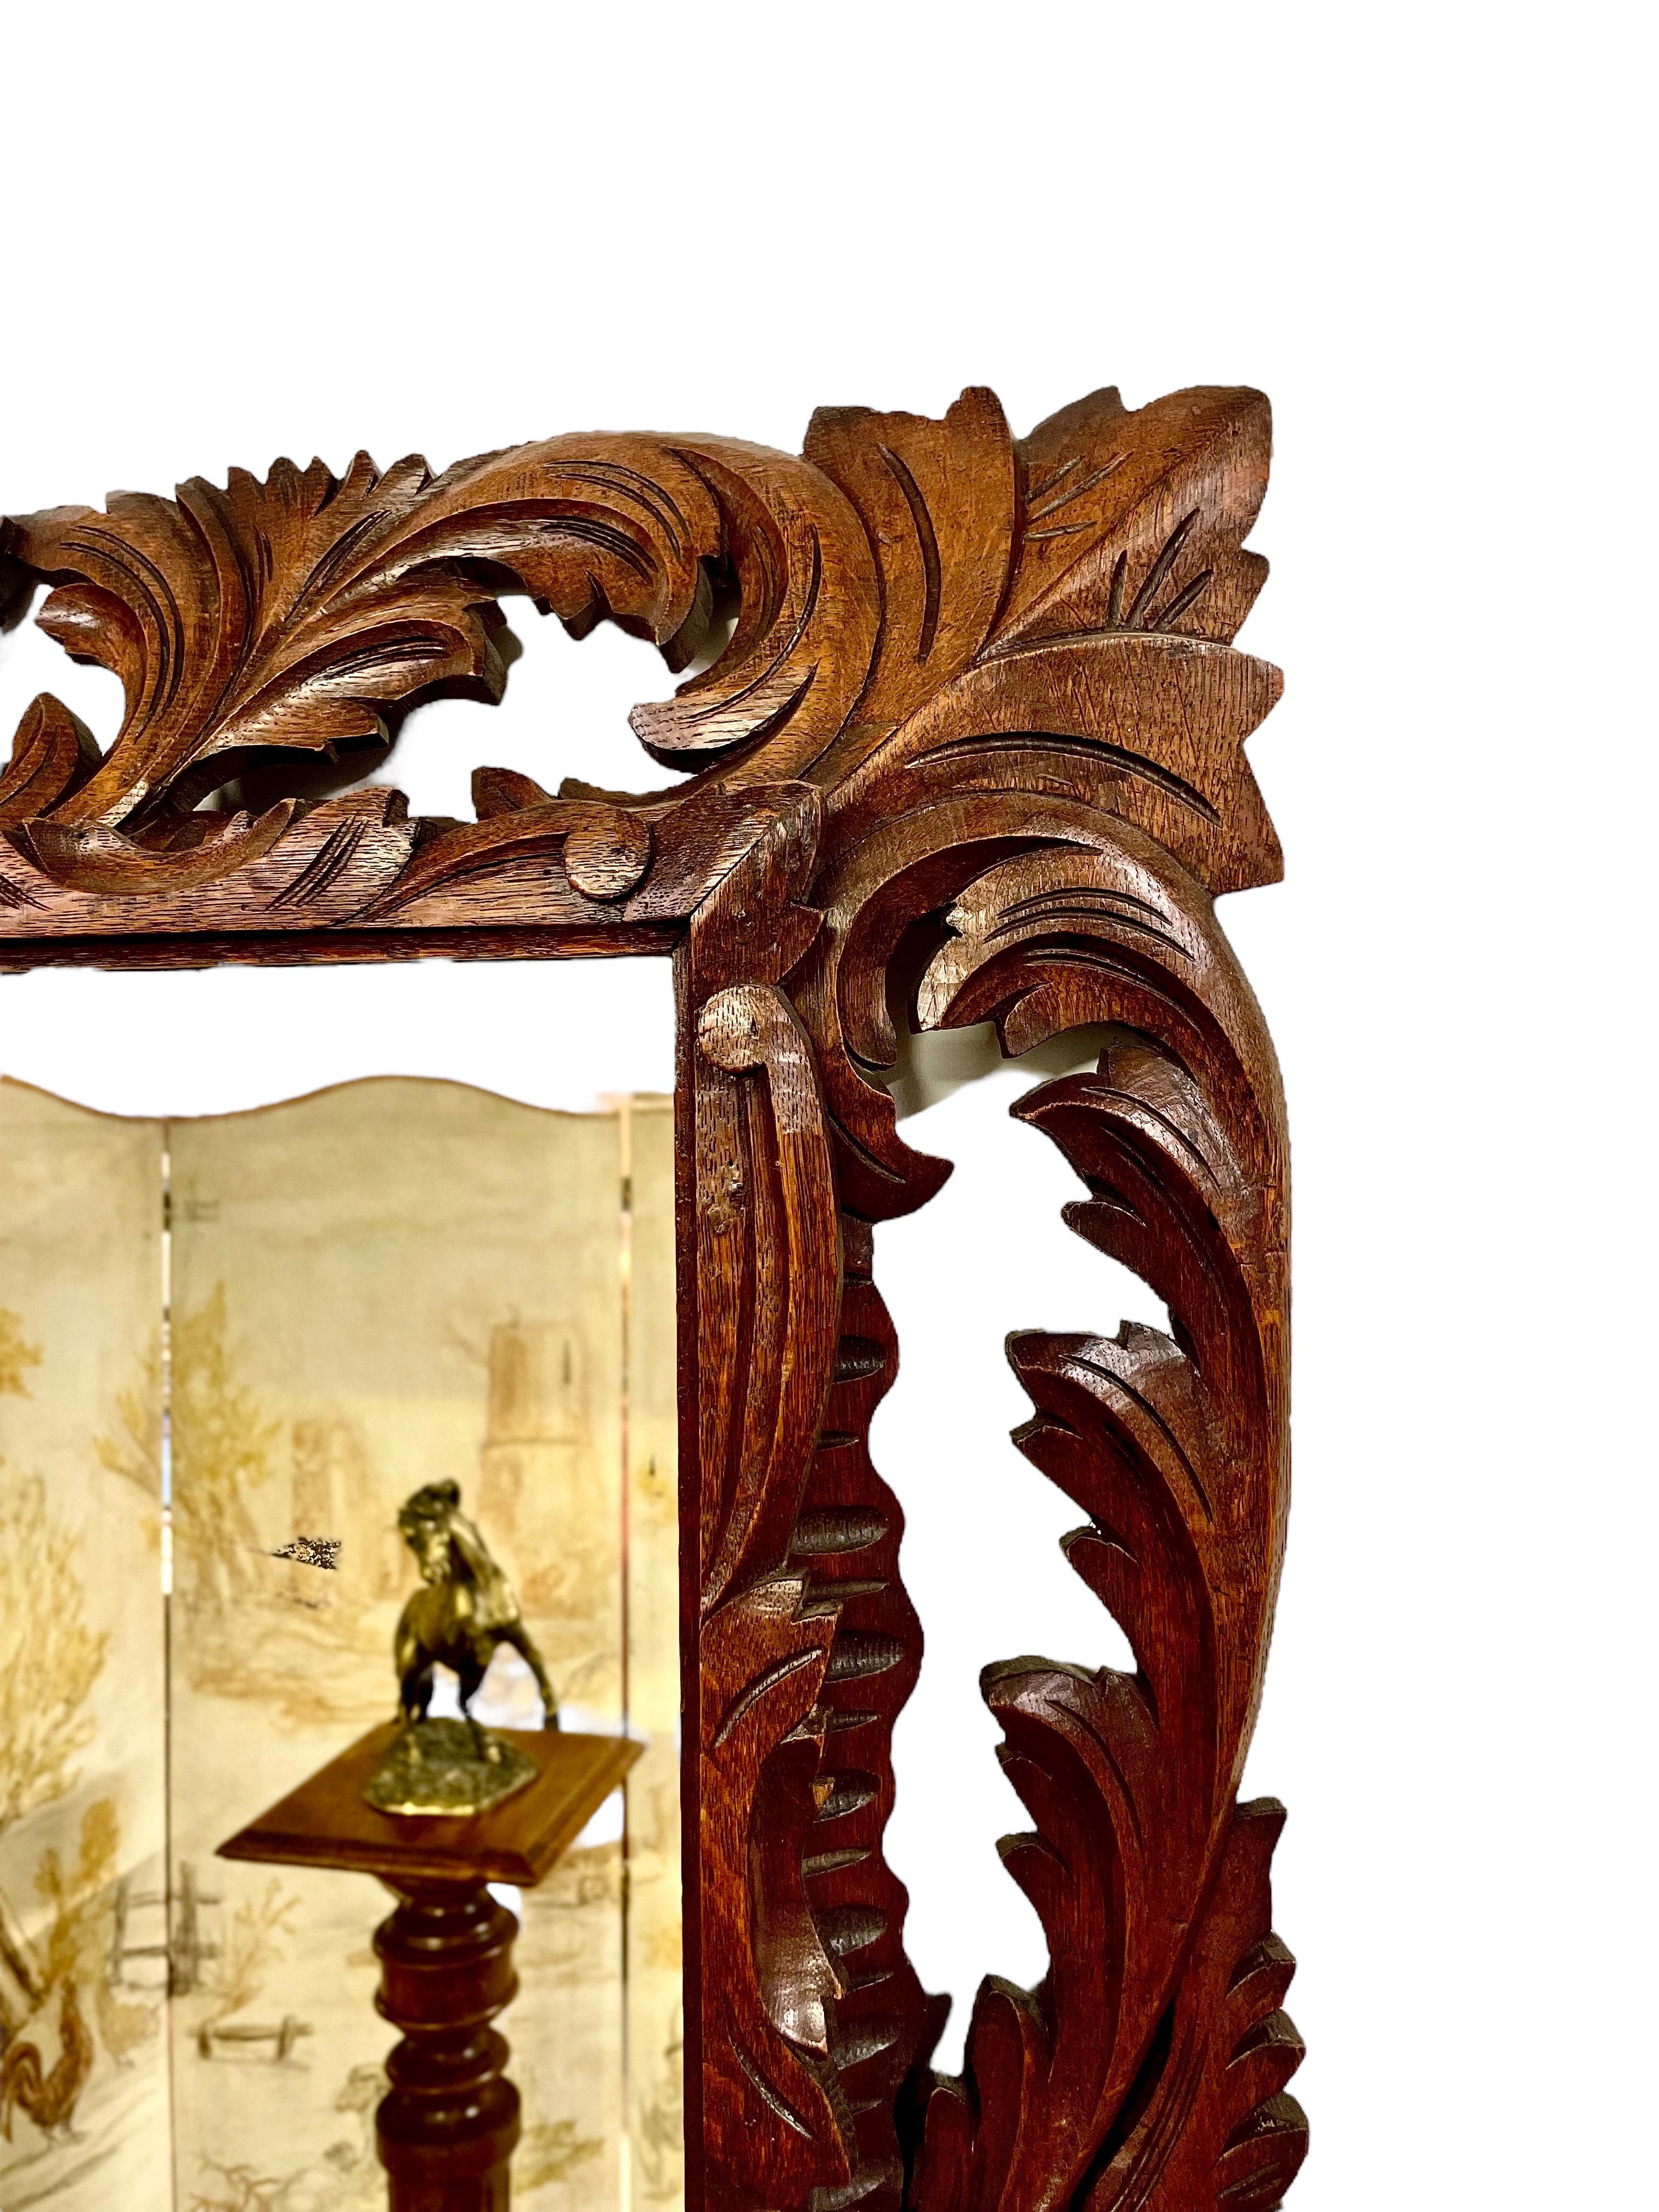 Impressive mirror made of carved and pierced oak in the Henri II style, adorned with acanthus leaf motifs. It dates back to the 19th century and has a charming presence of 'foxing' on the glass surface. This mirror is a fine example of craftsmanship